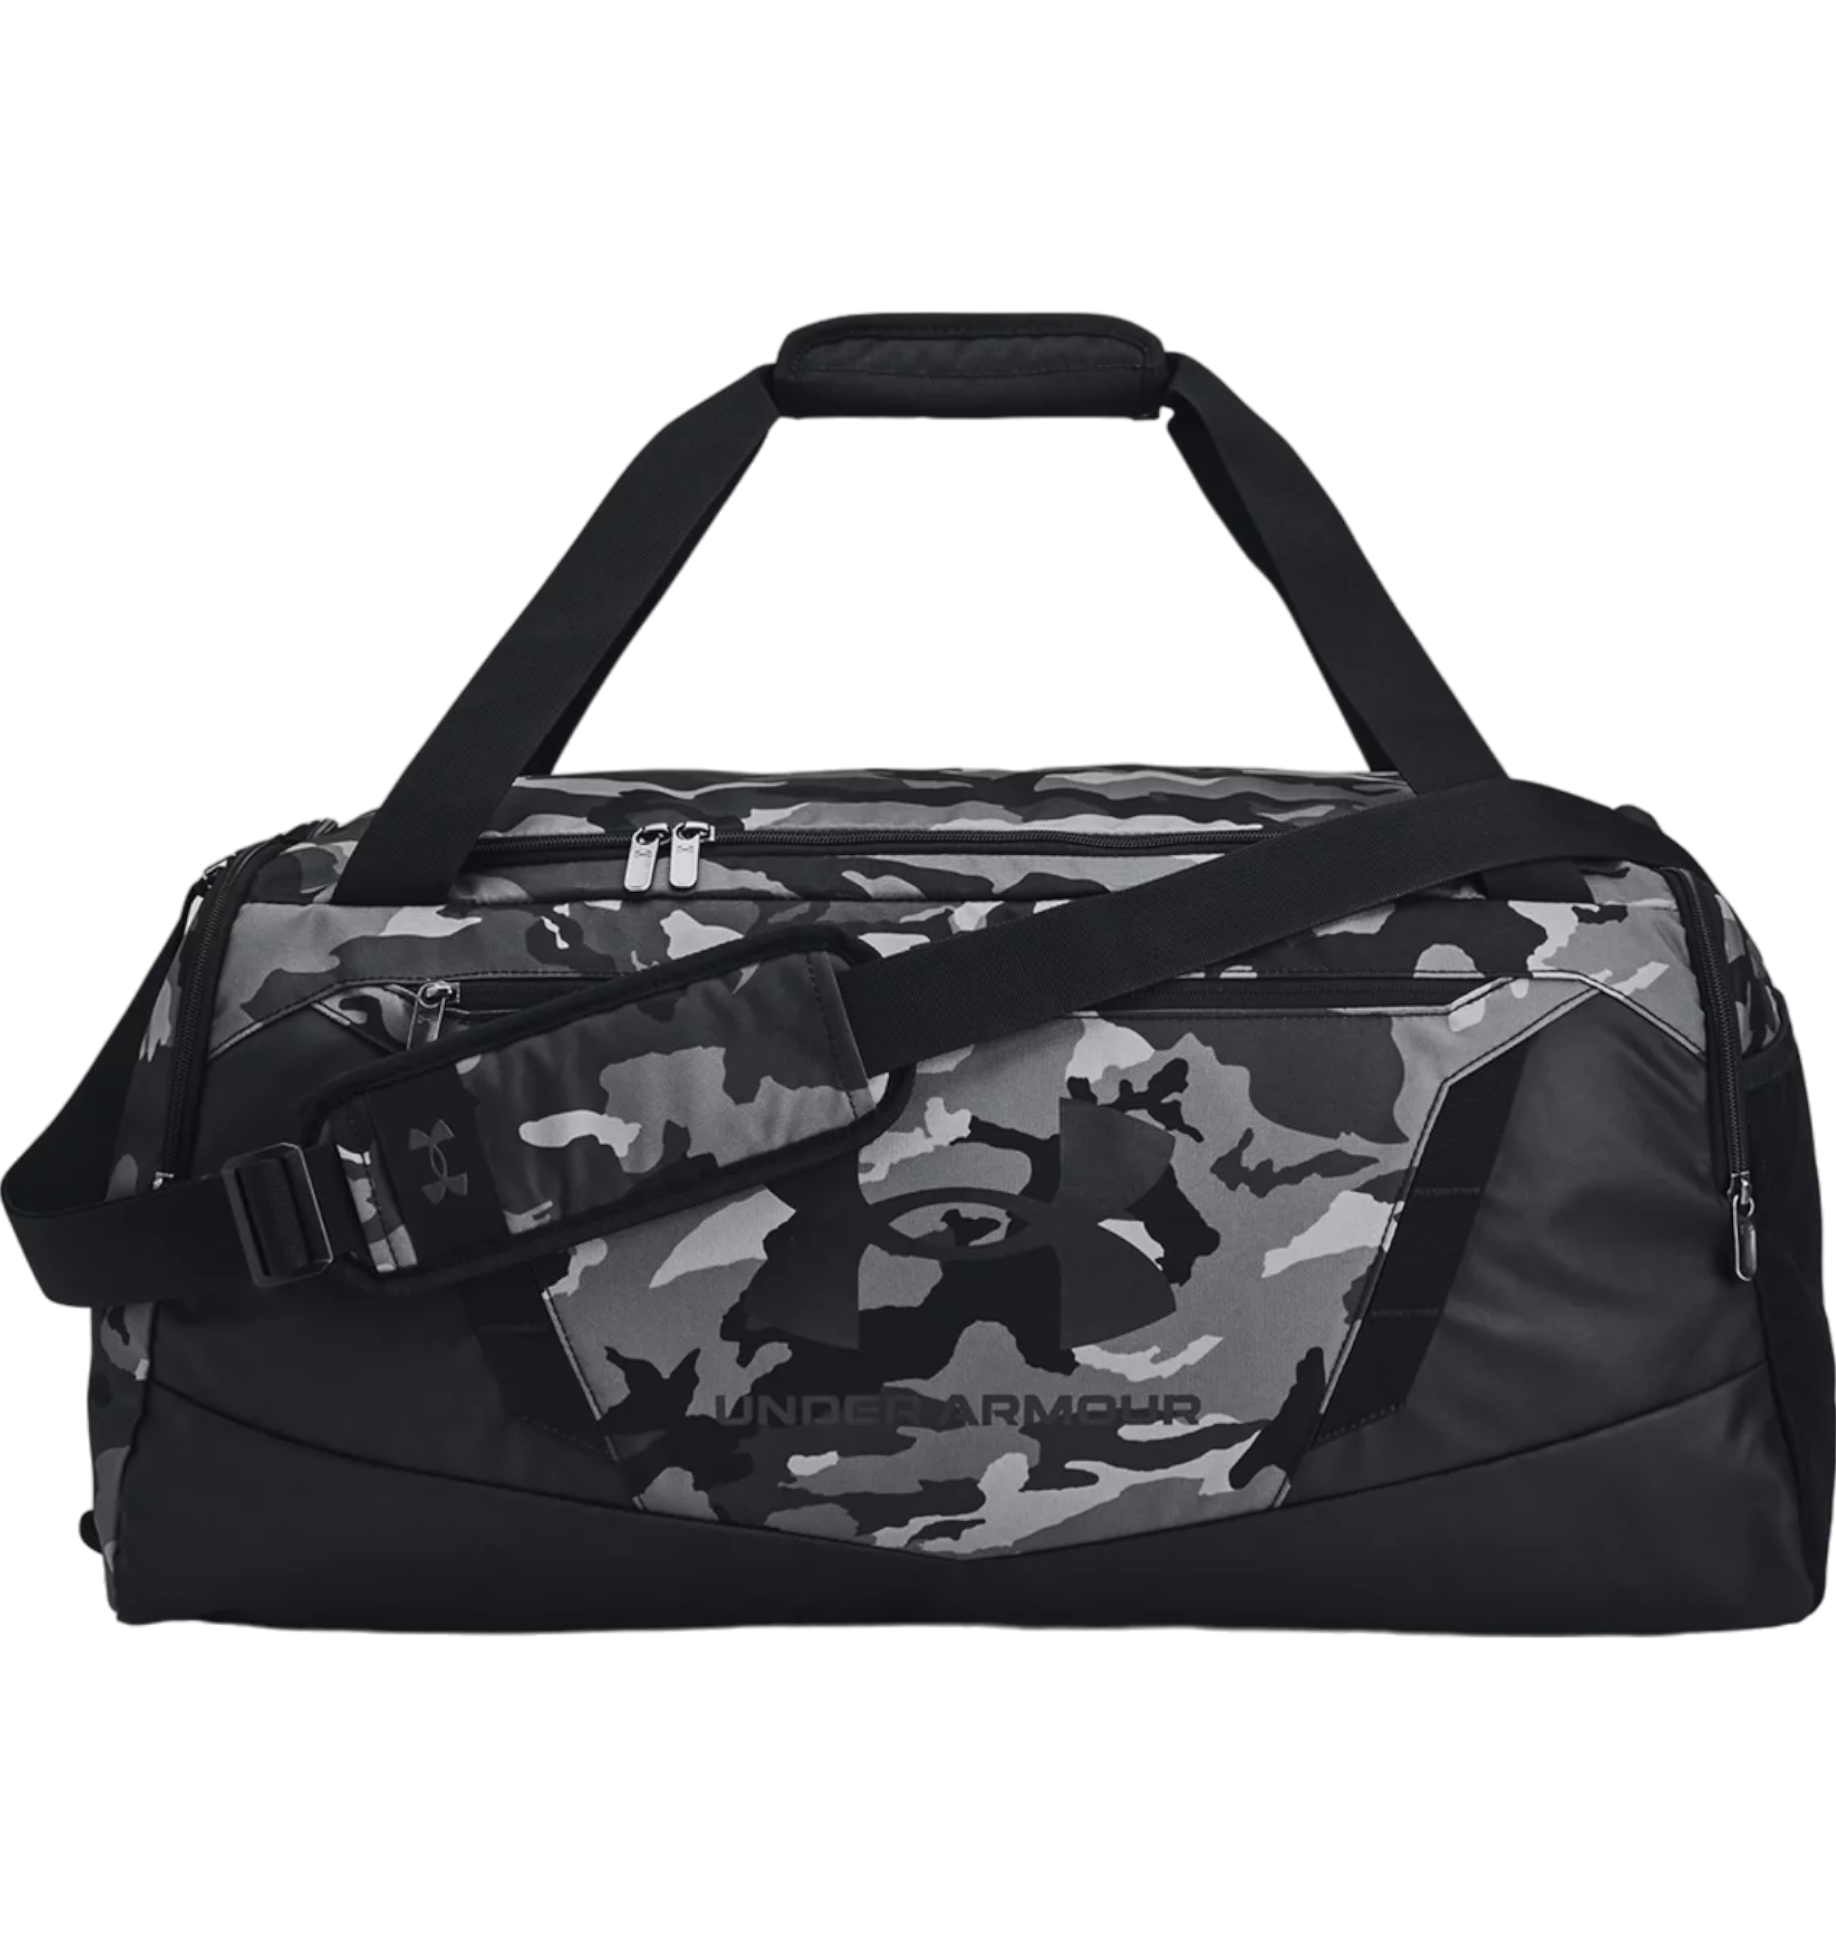 Bag Under Armour UA Undeniable 5.0 Duffle MD